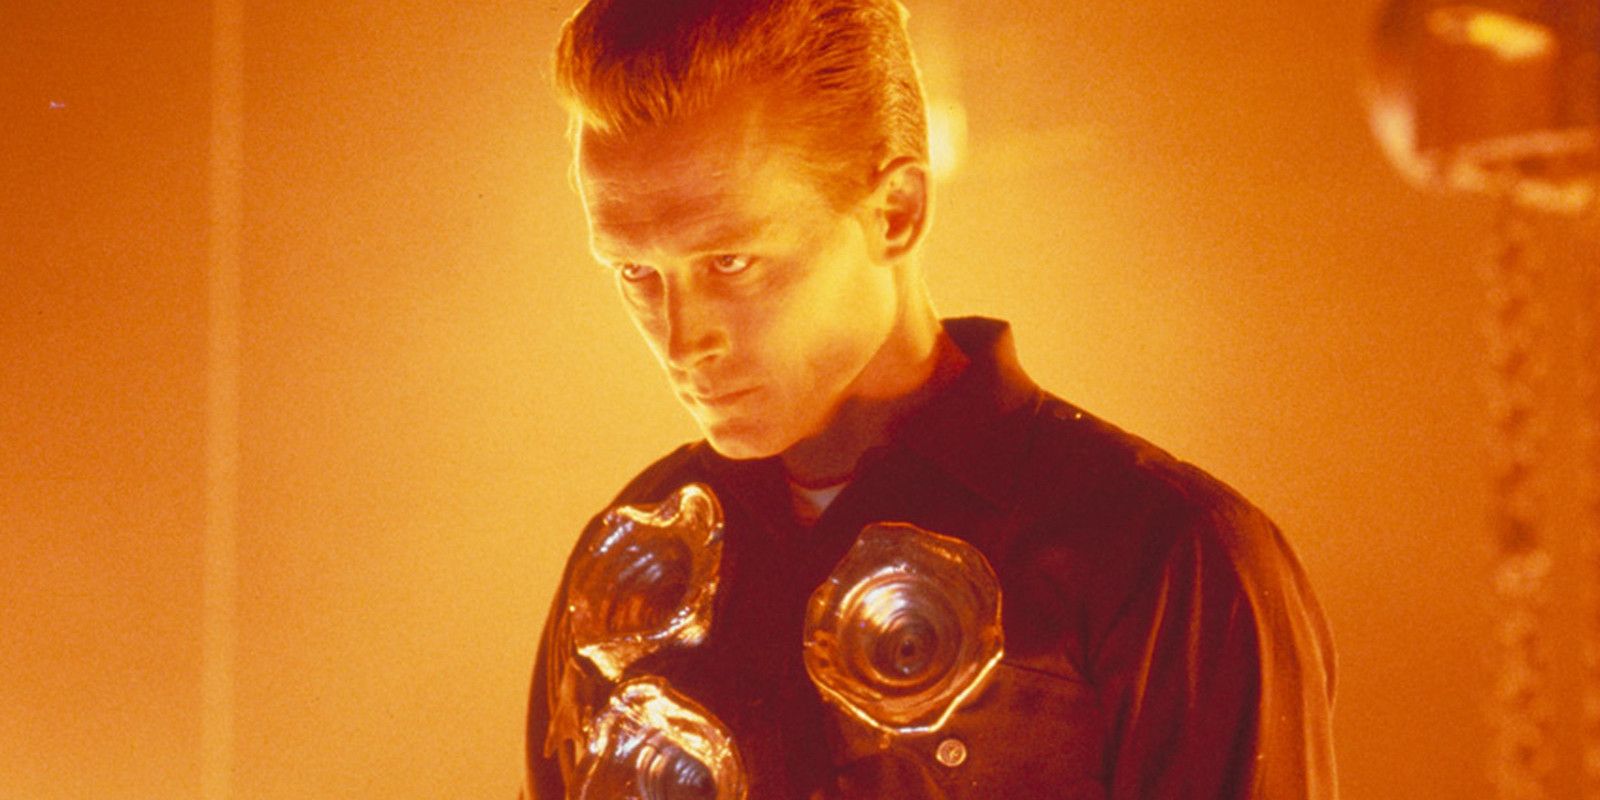 Robert Patrick as the T-1000 in the Boiler Room in Terminator 2 Judgment Day